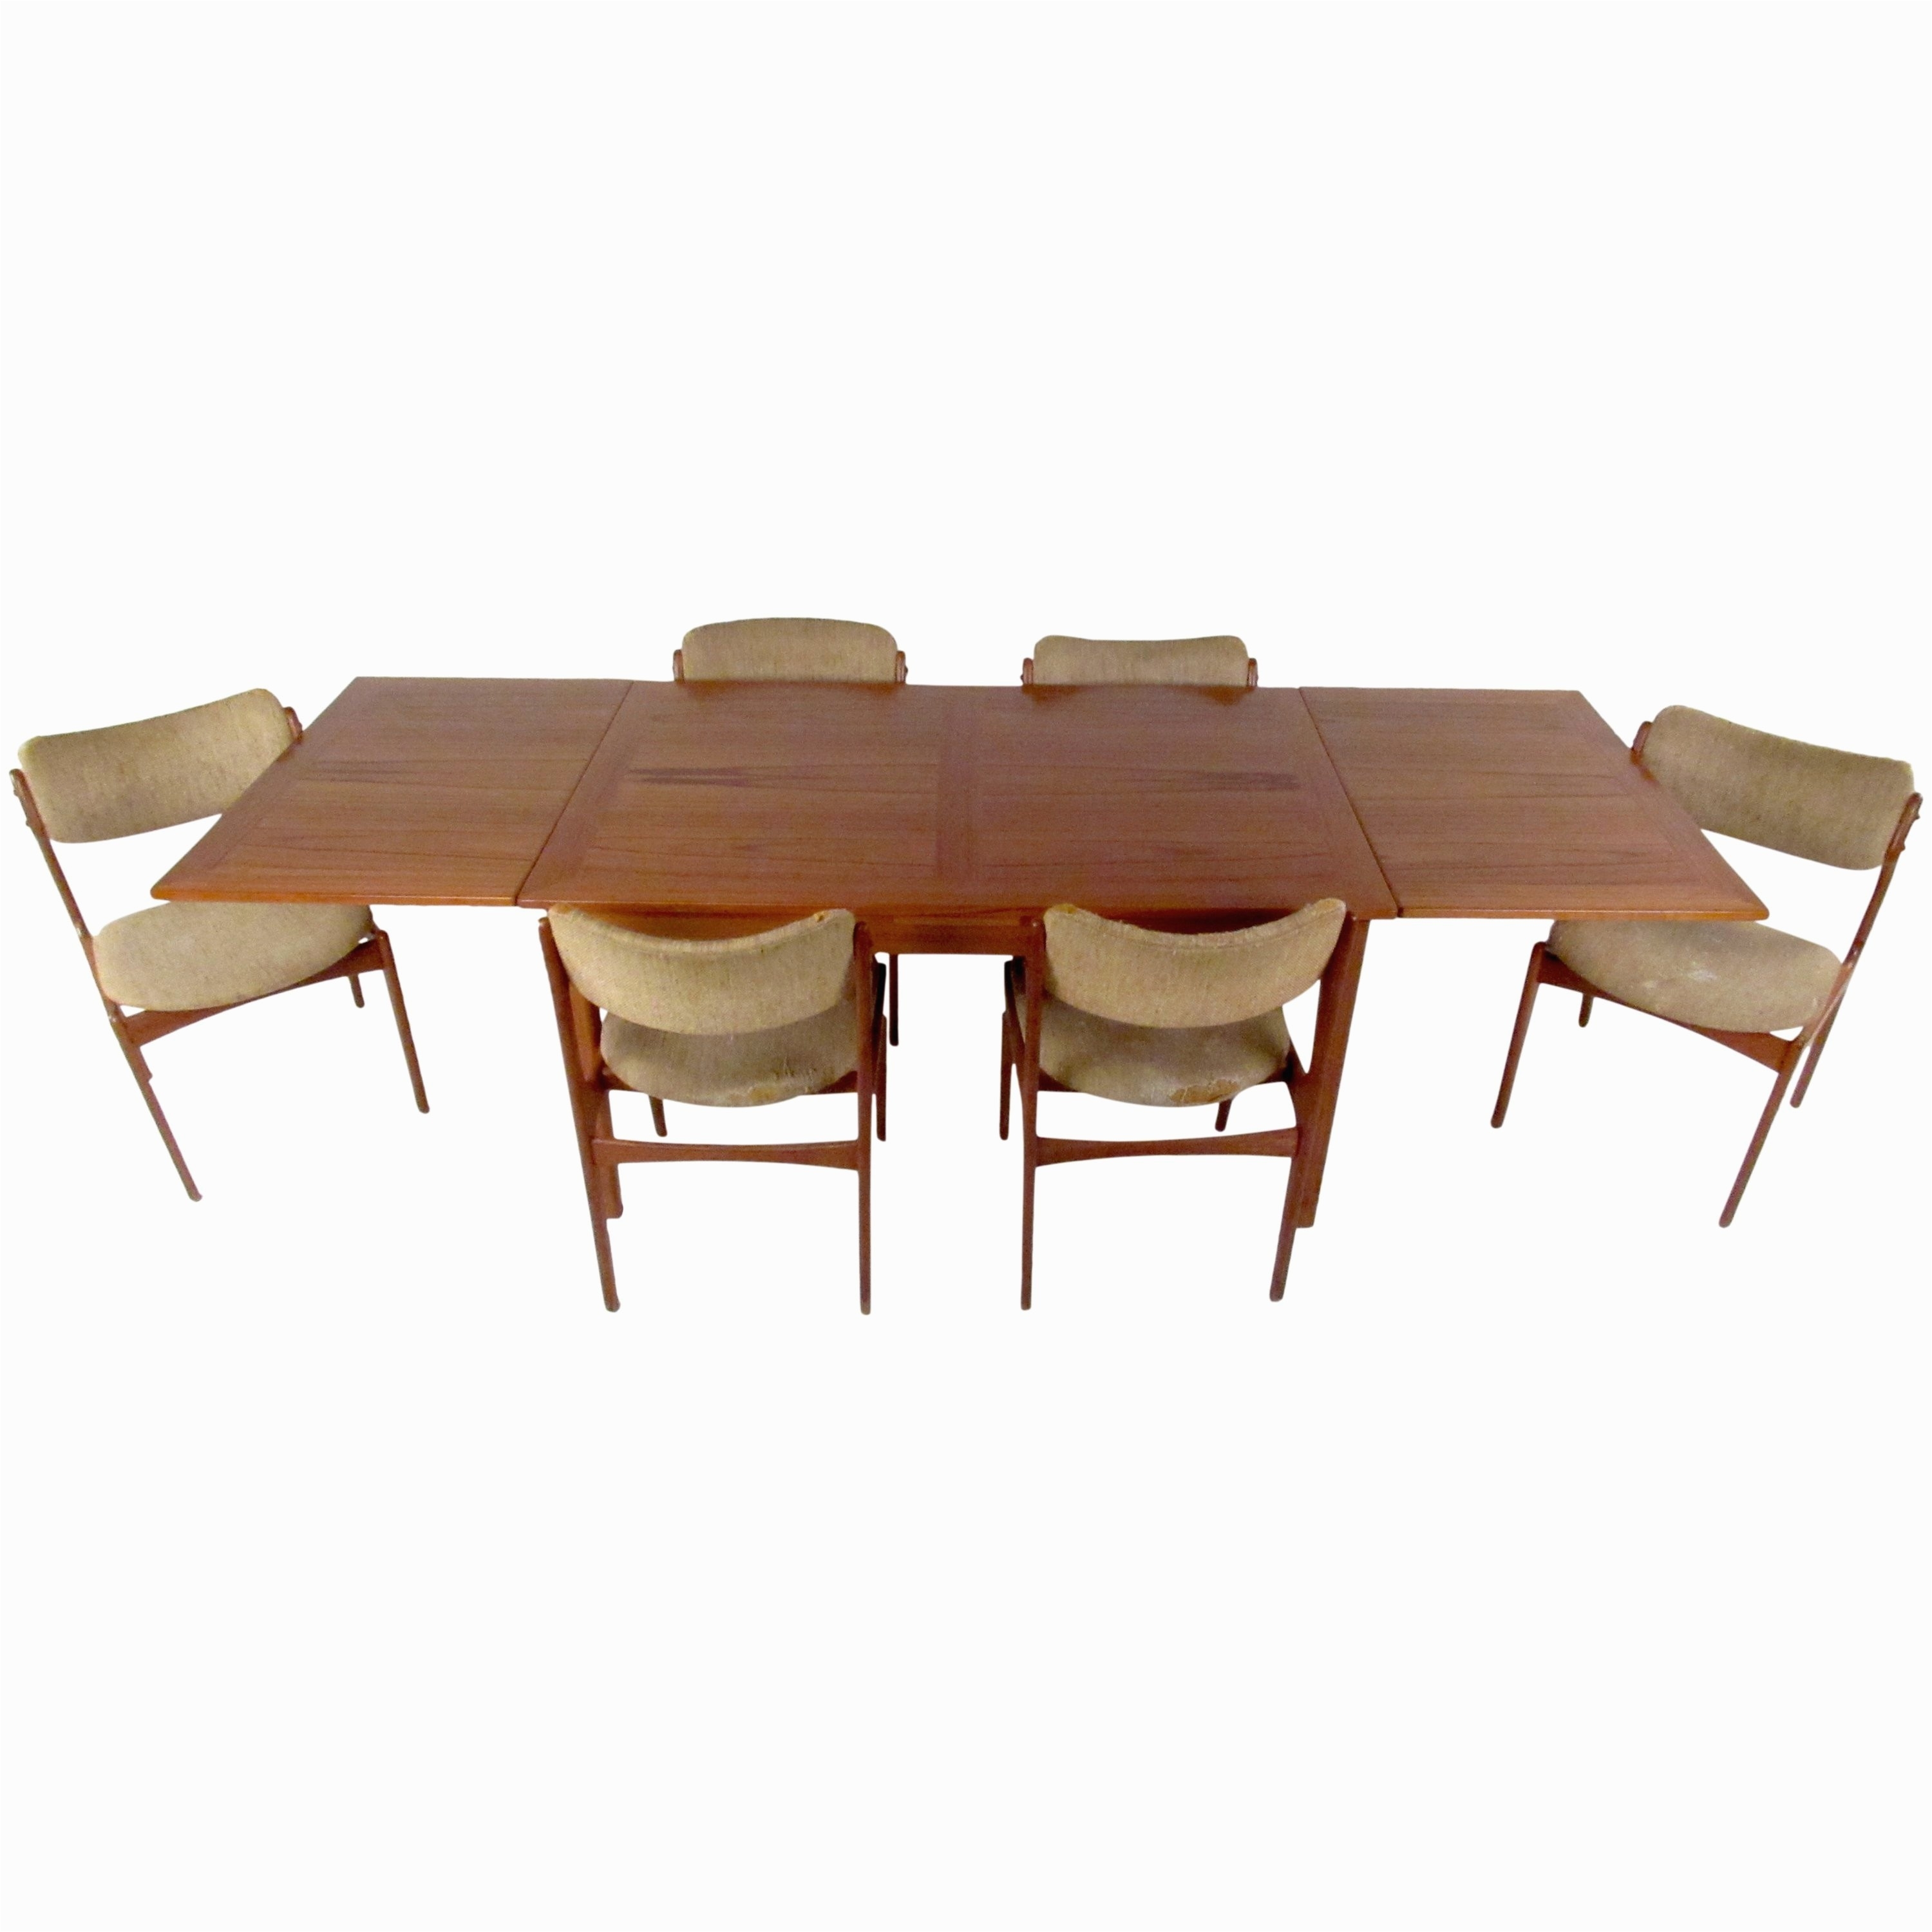 solid wood dining table sets precious real wood dining room sets best furniture patio loveseat